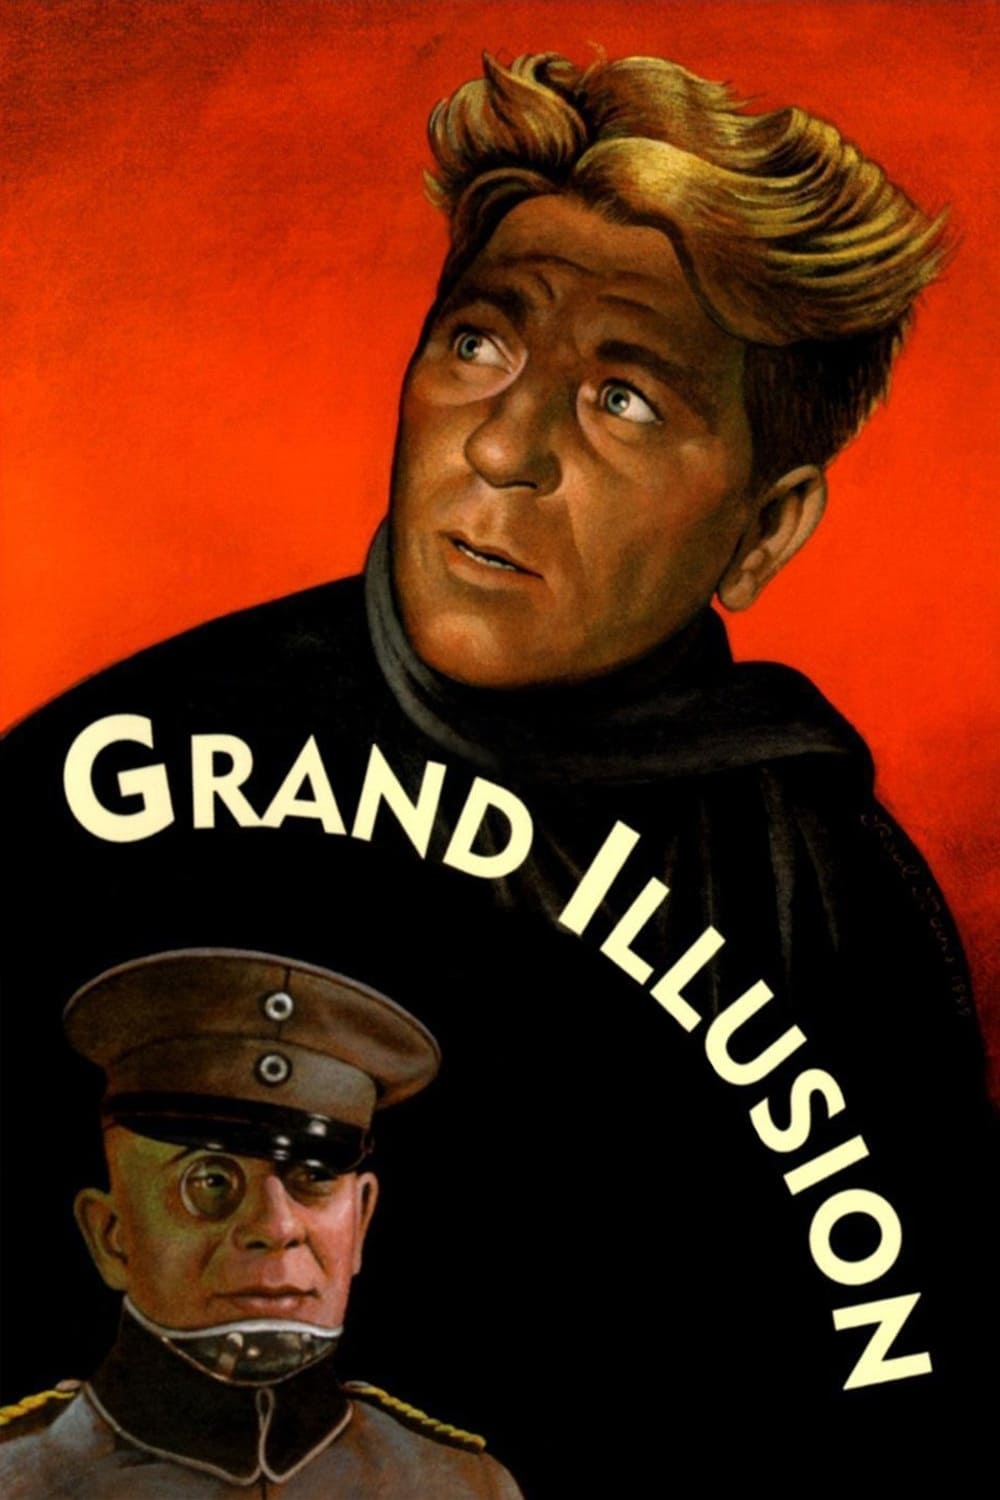 Poster for the movie "Grand Illusion"